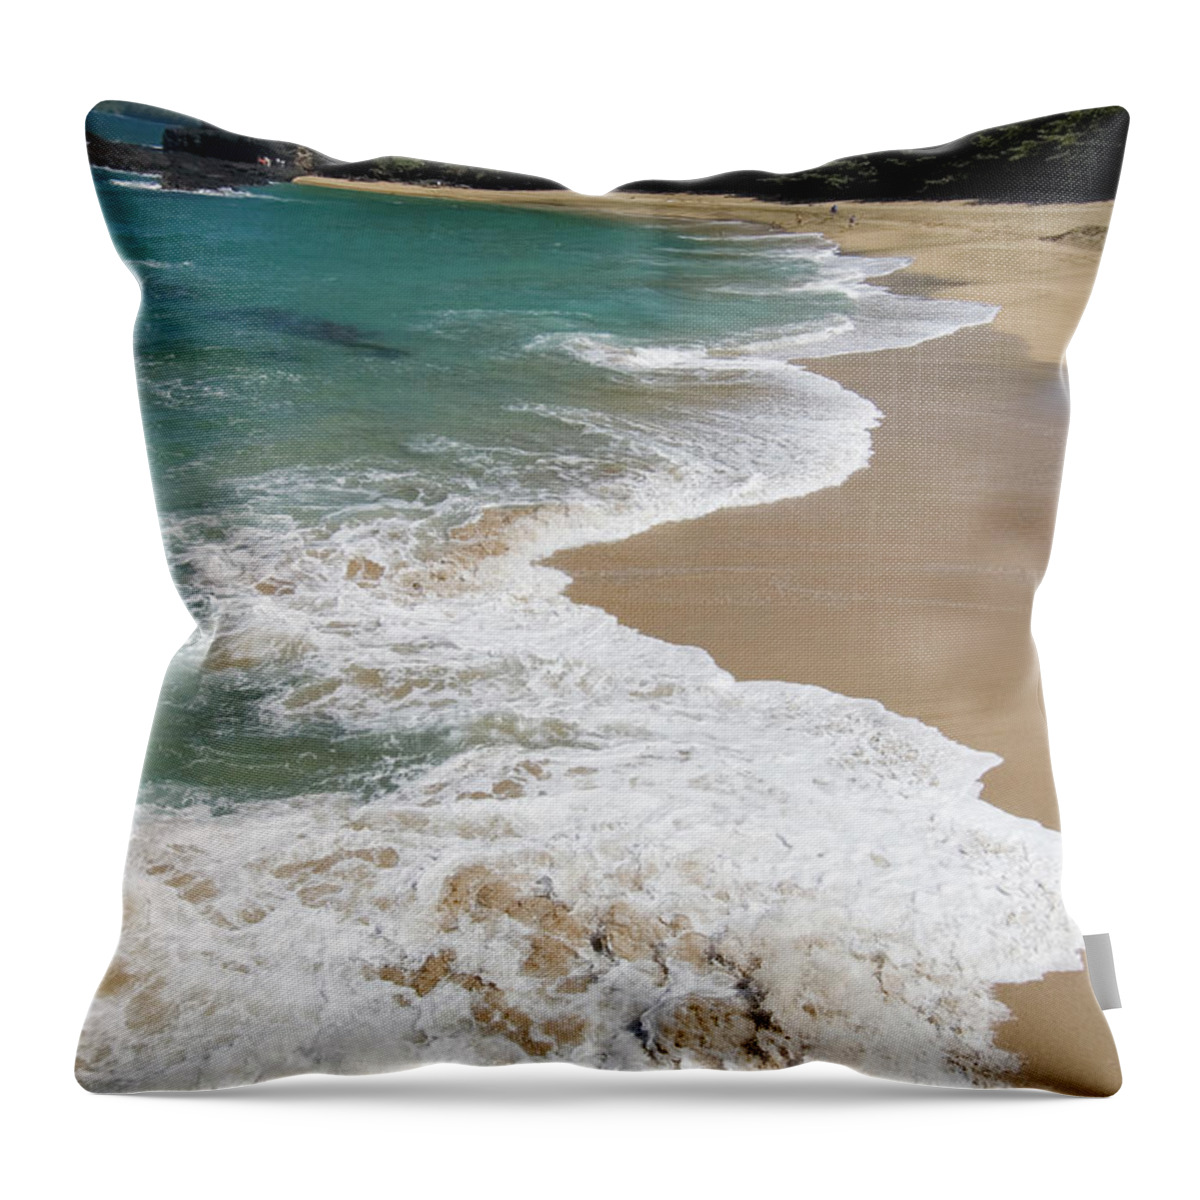 Scenics Throw Pillow featuring the photograph Wave Breaking On Lumahai Beach by John Elk